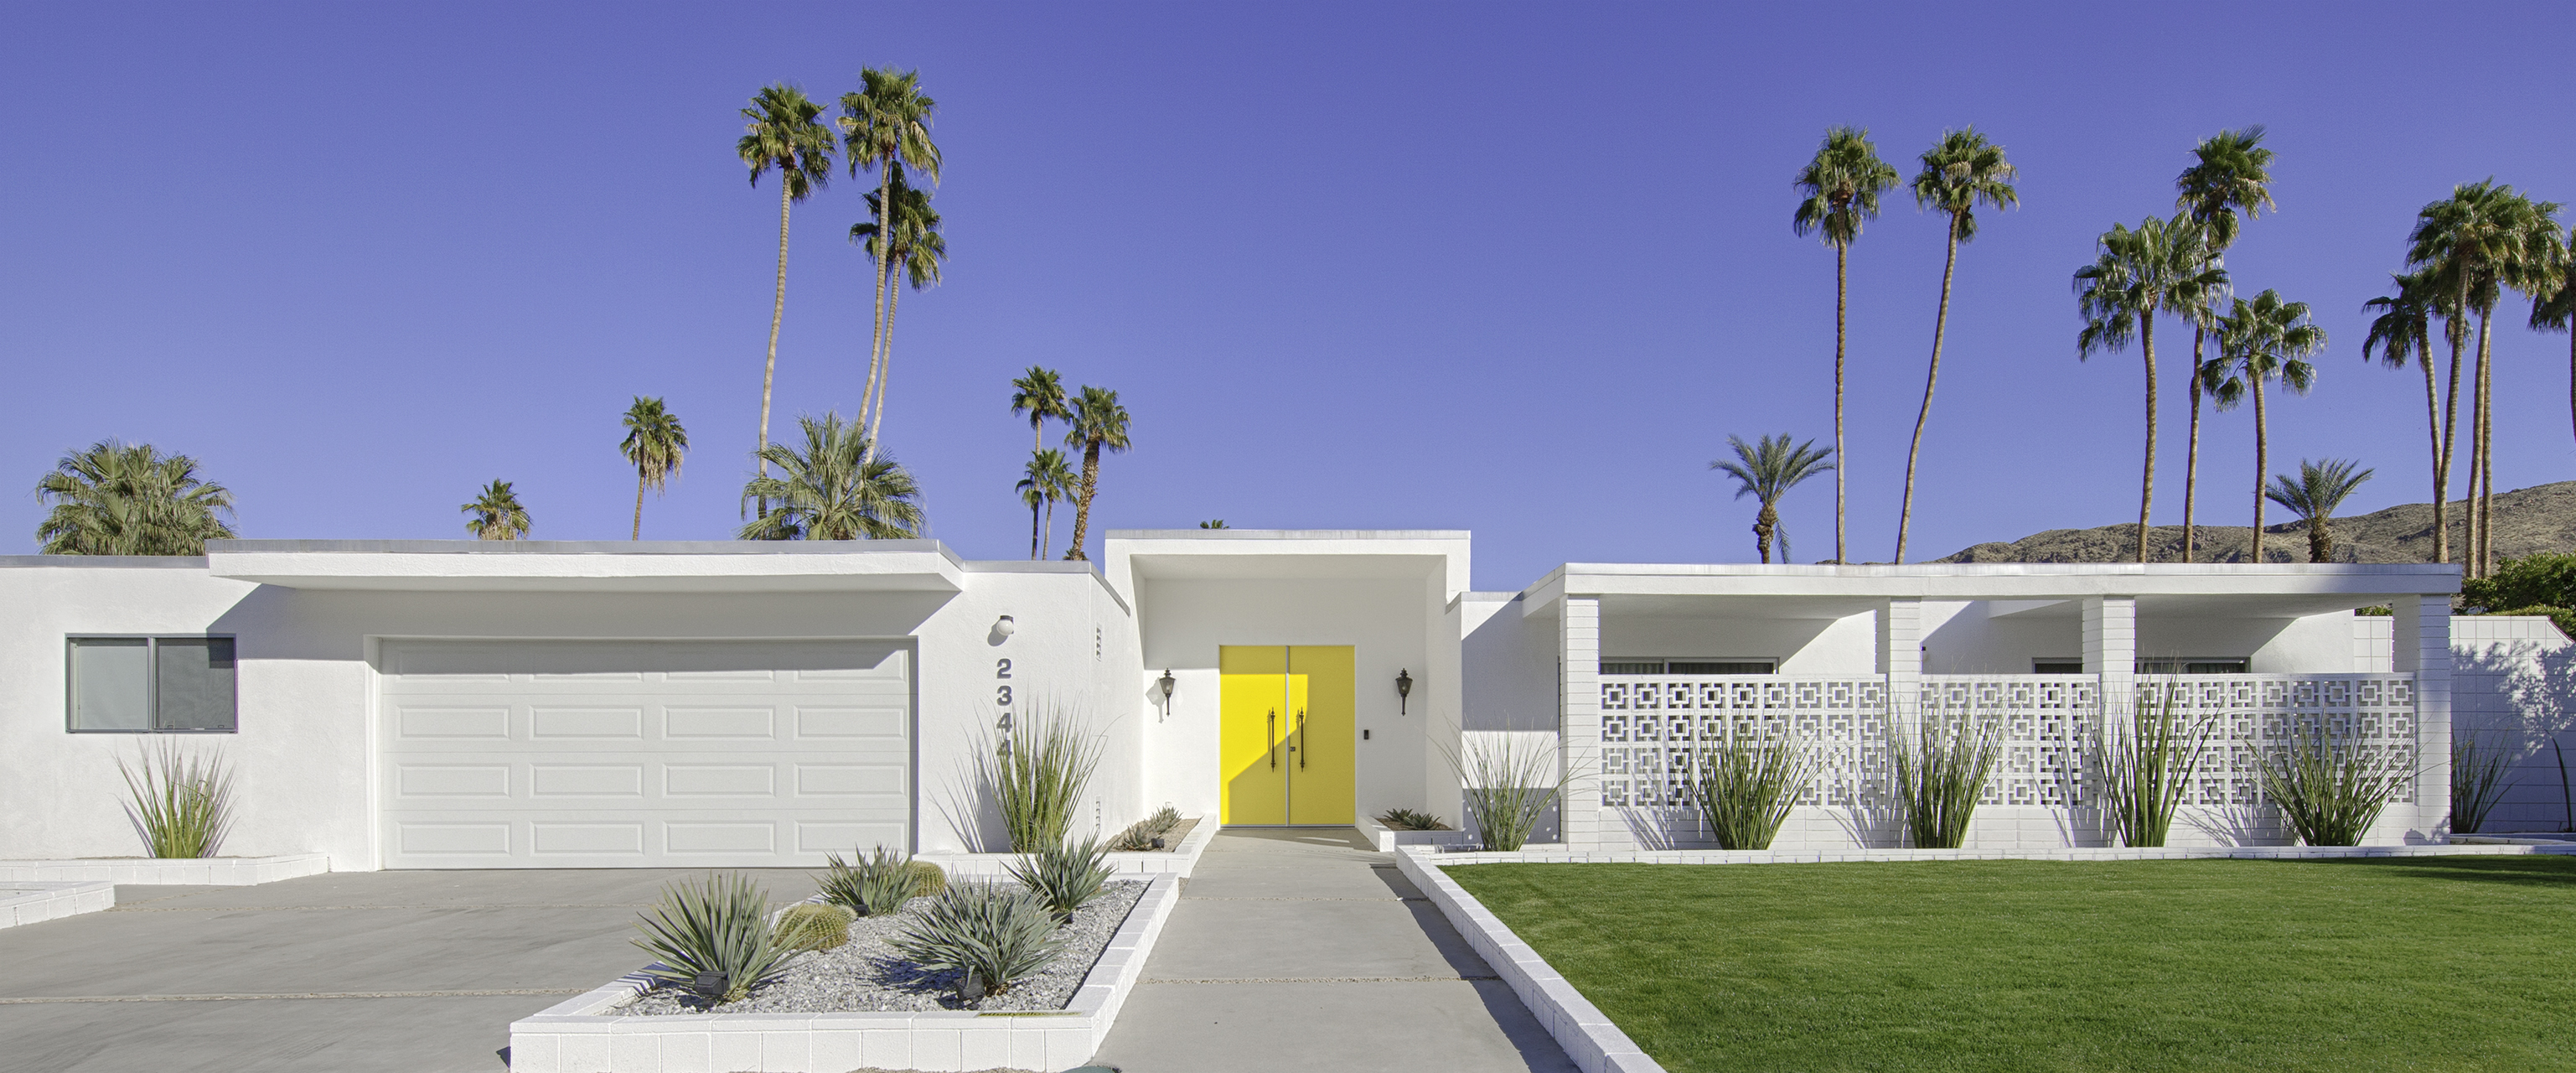 palm springs real estate, pools in palm springs, high desert real estate